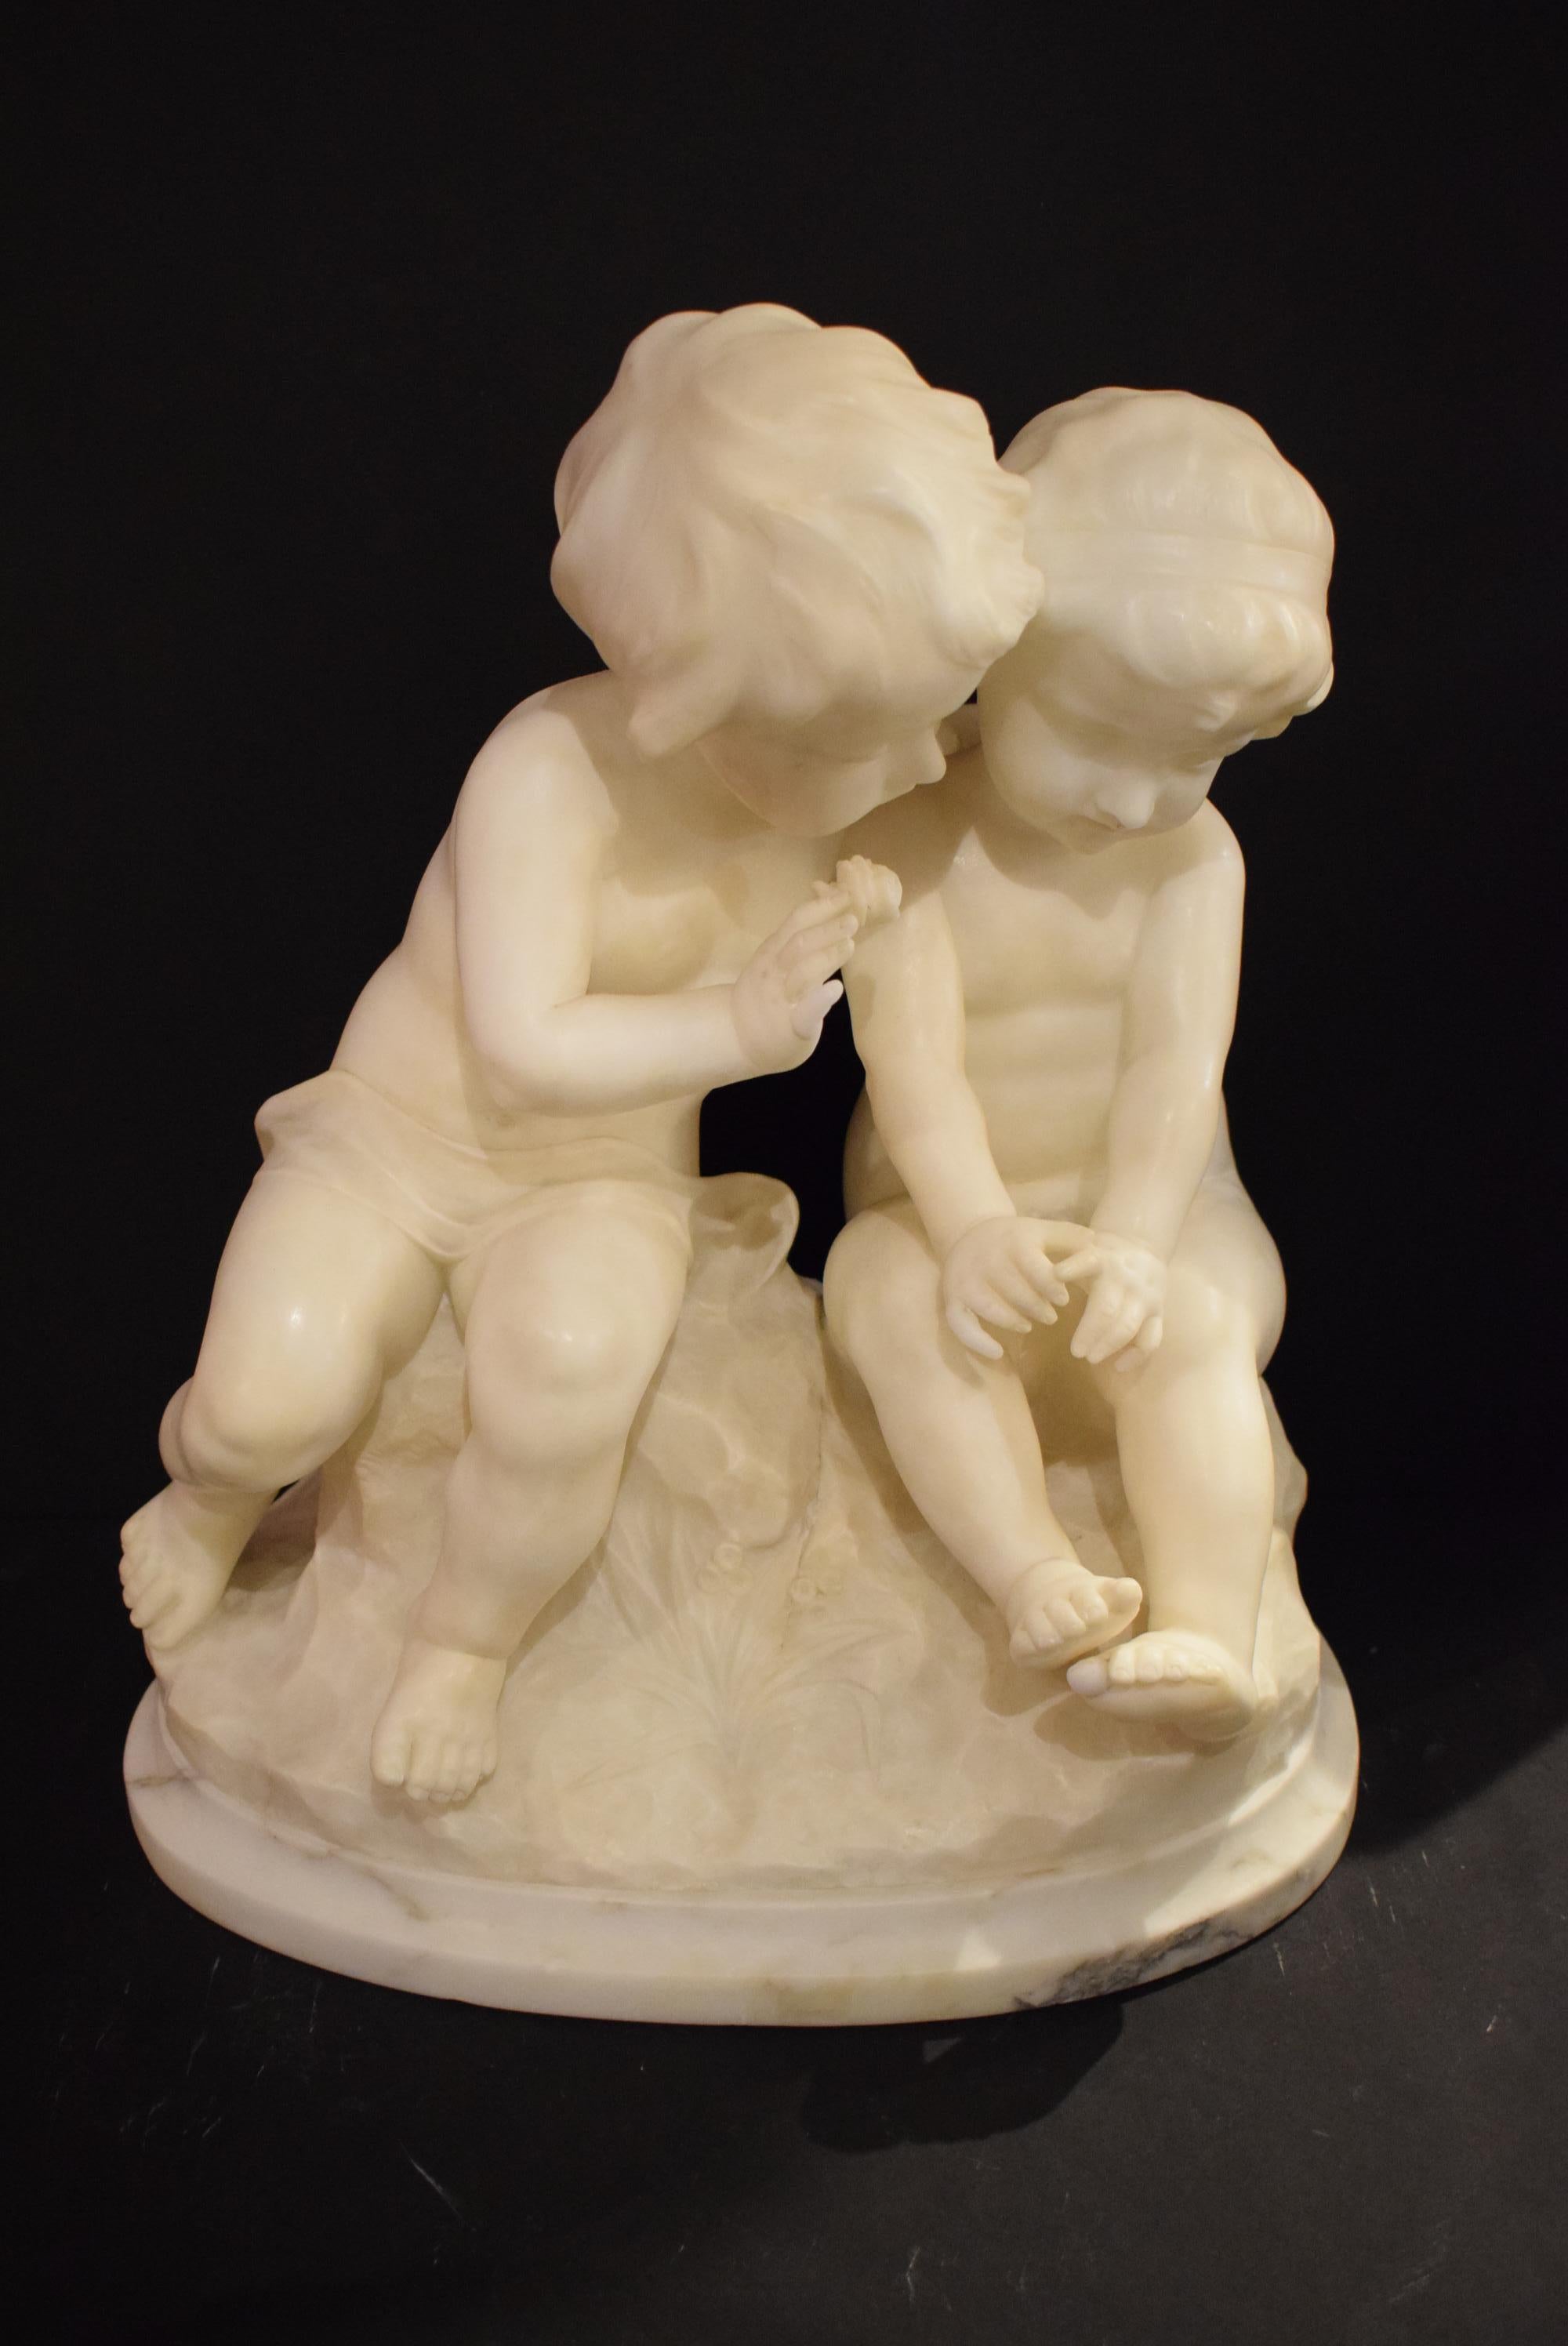 A very fine alabaster statue of children
Dimensions: Height 17